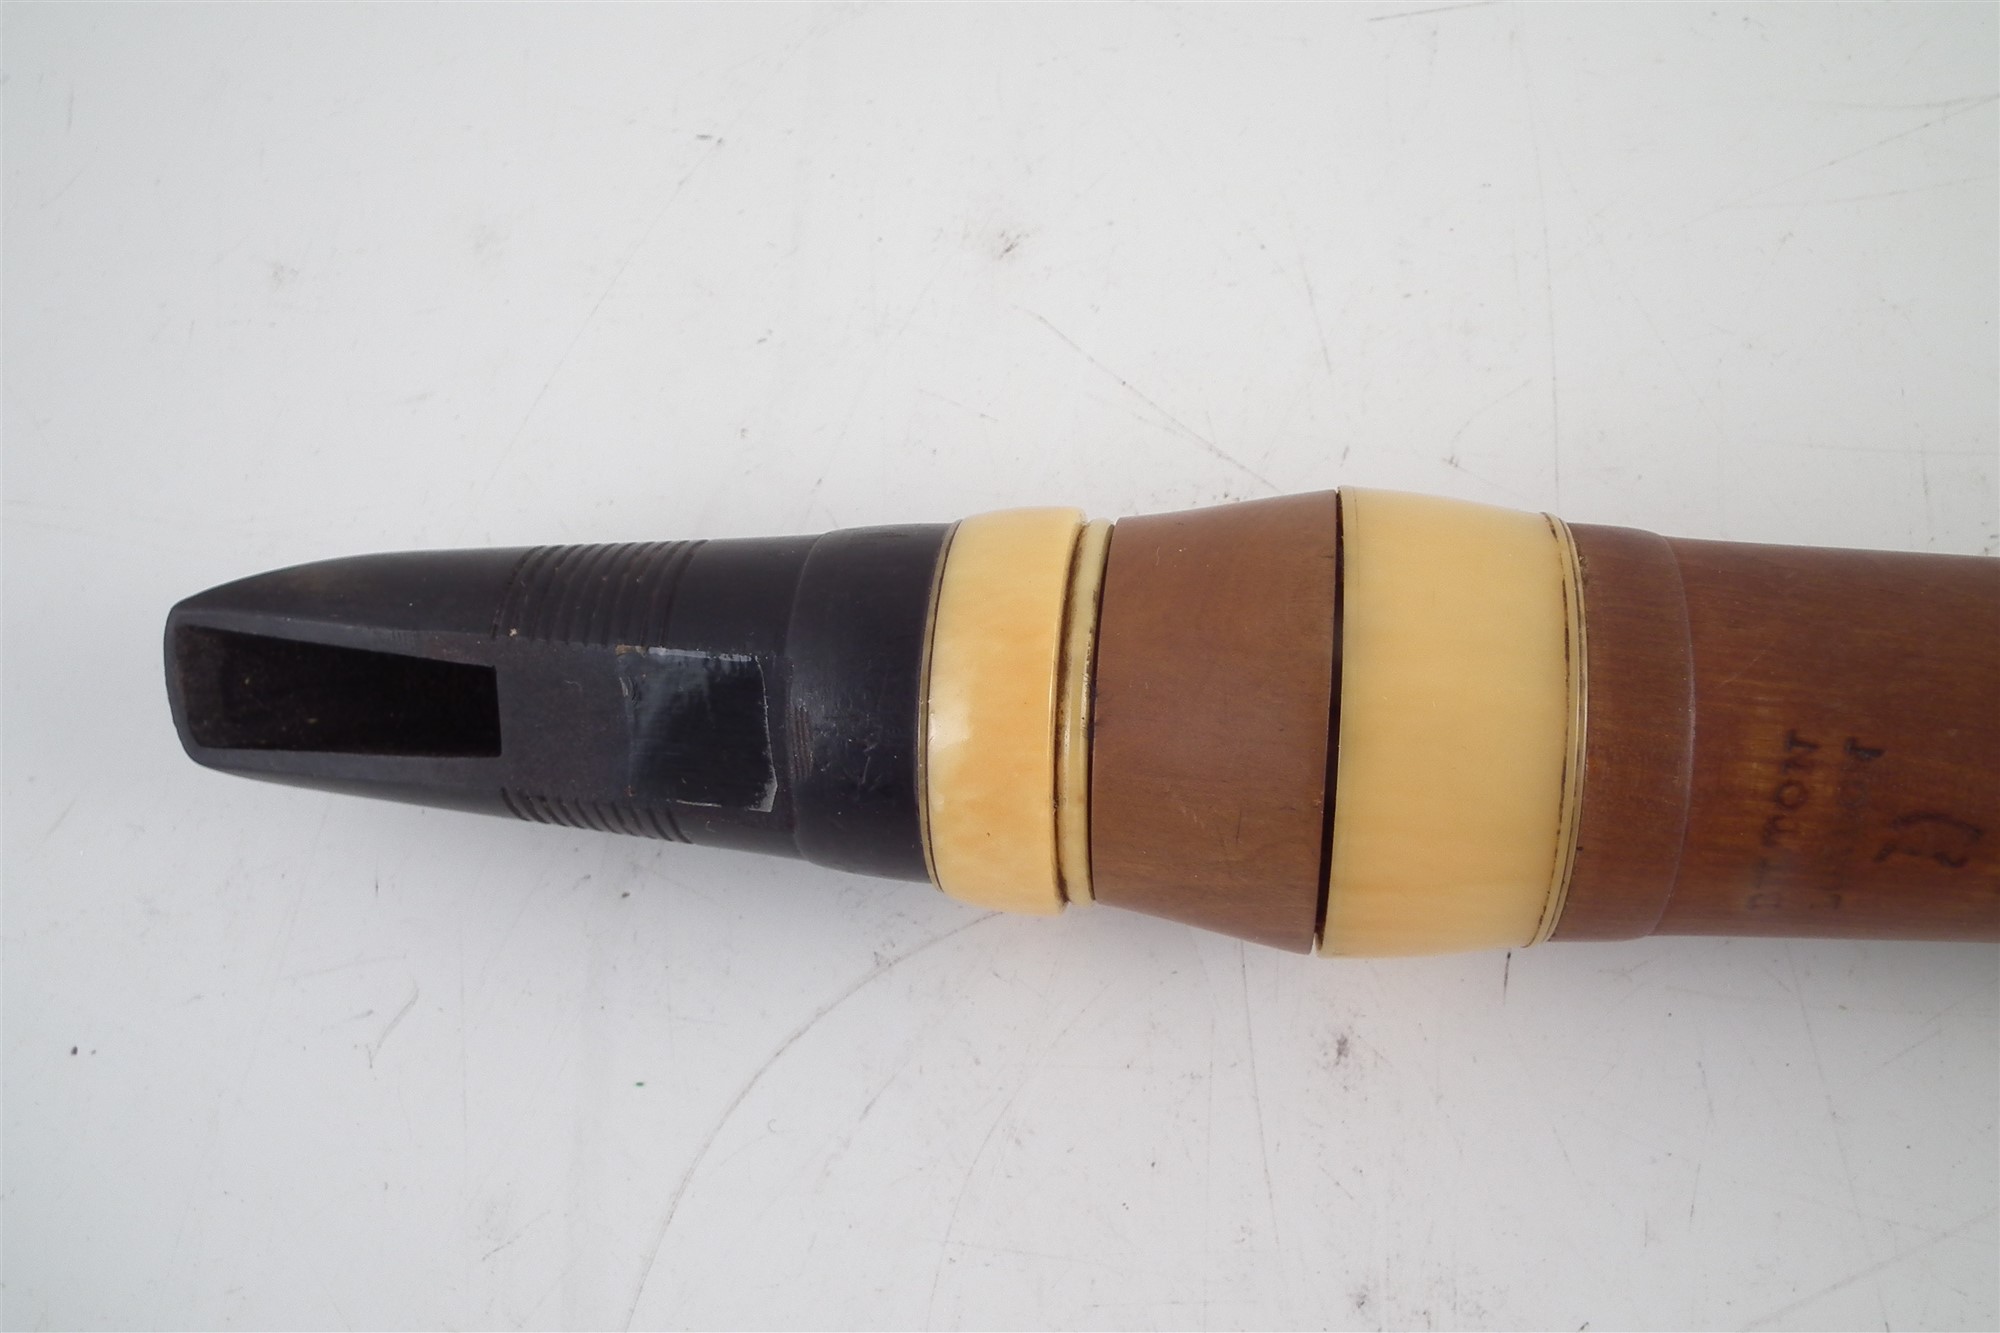 Boxwood and ivory clarinet by Bilton, stamped with 93 Westminster Bridge Road London address, with - Image 5 of 9